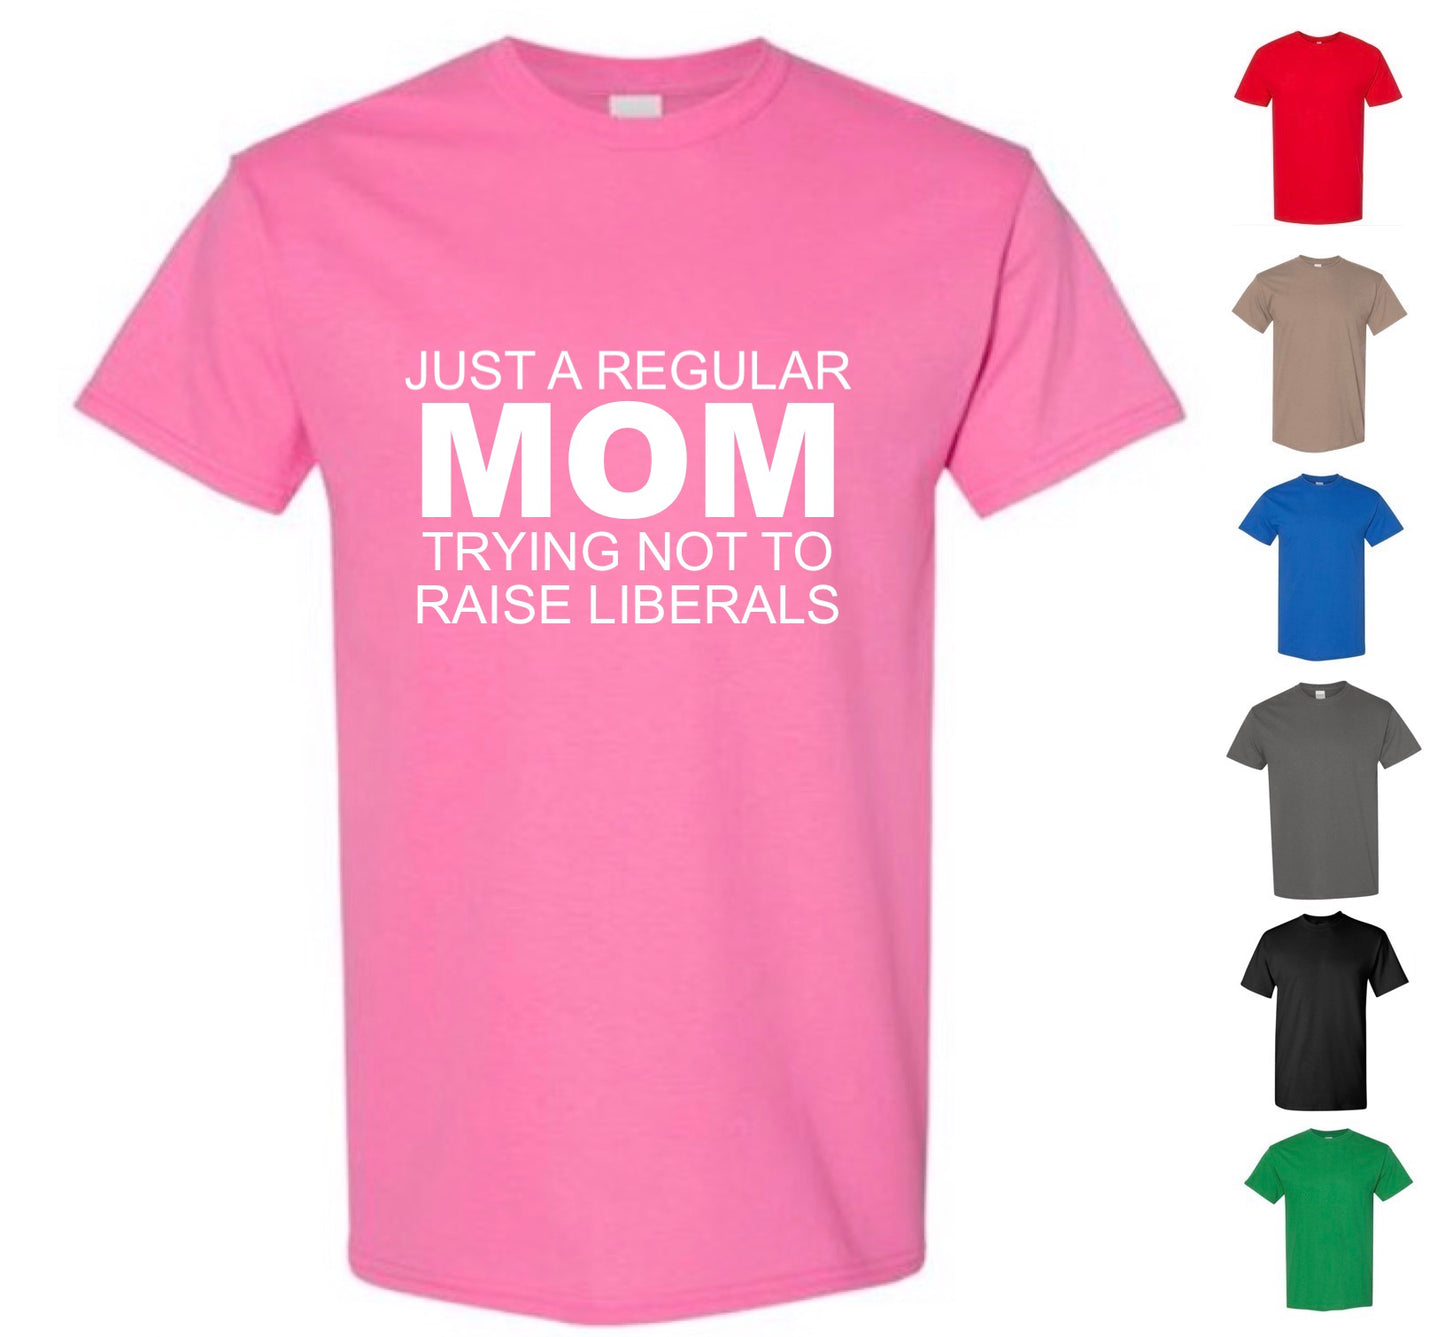 Just A Regular Mom Trying Not To Raise Liberals (FREE Shipping)